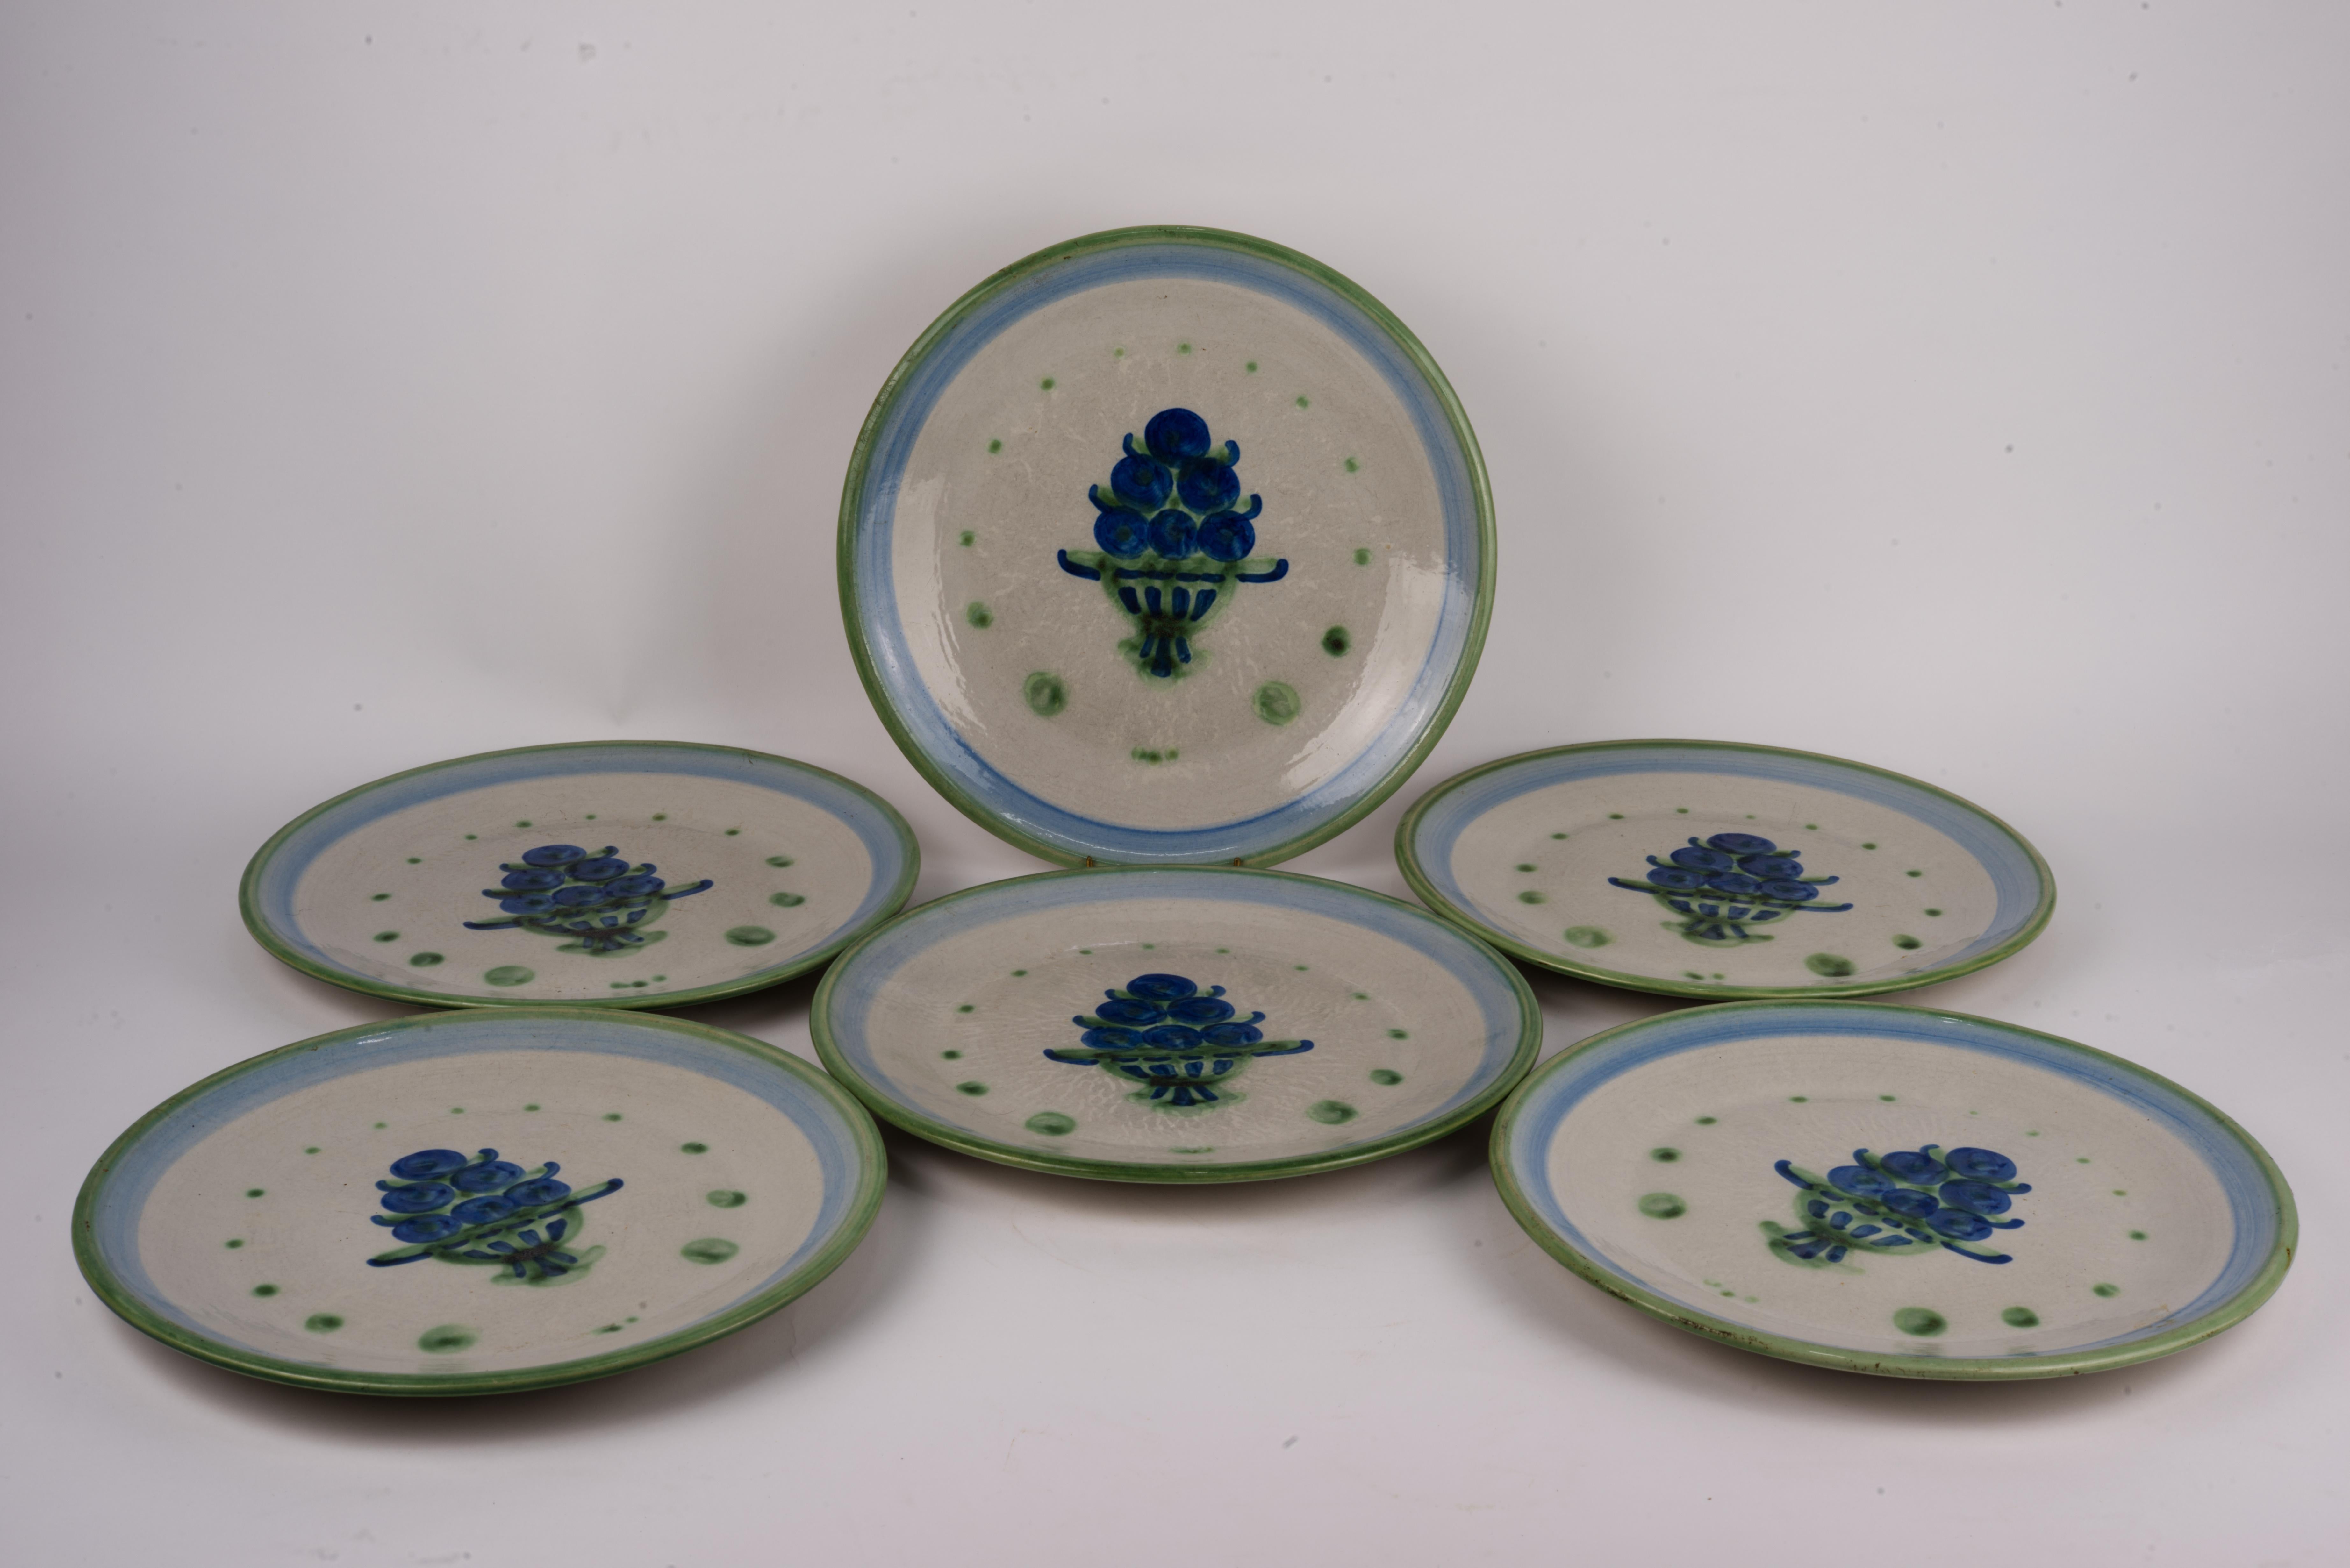  Set of 6 dinner plates was had thrown and hand painted by Hadley Pottery in Louisville, Kentucky, in Bouquet pattern. The pattern consists of a stylized basket with blue dots/flowers (sometimes referred to as blueberries) surrounded by green dots.